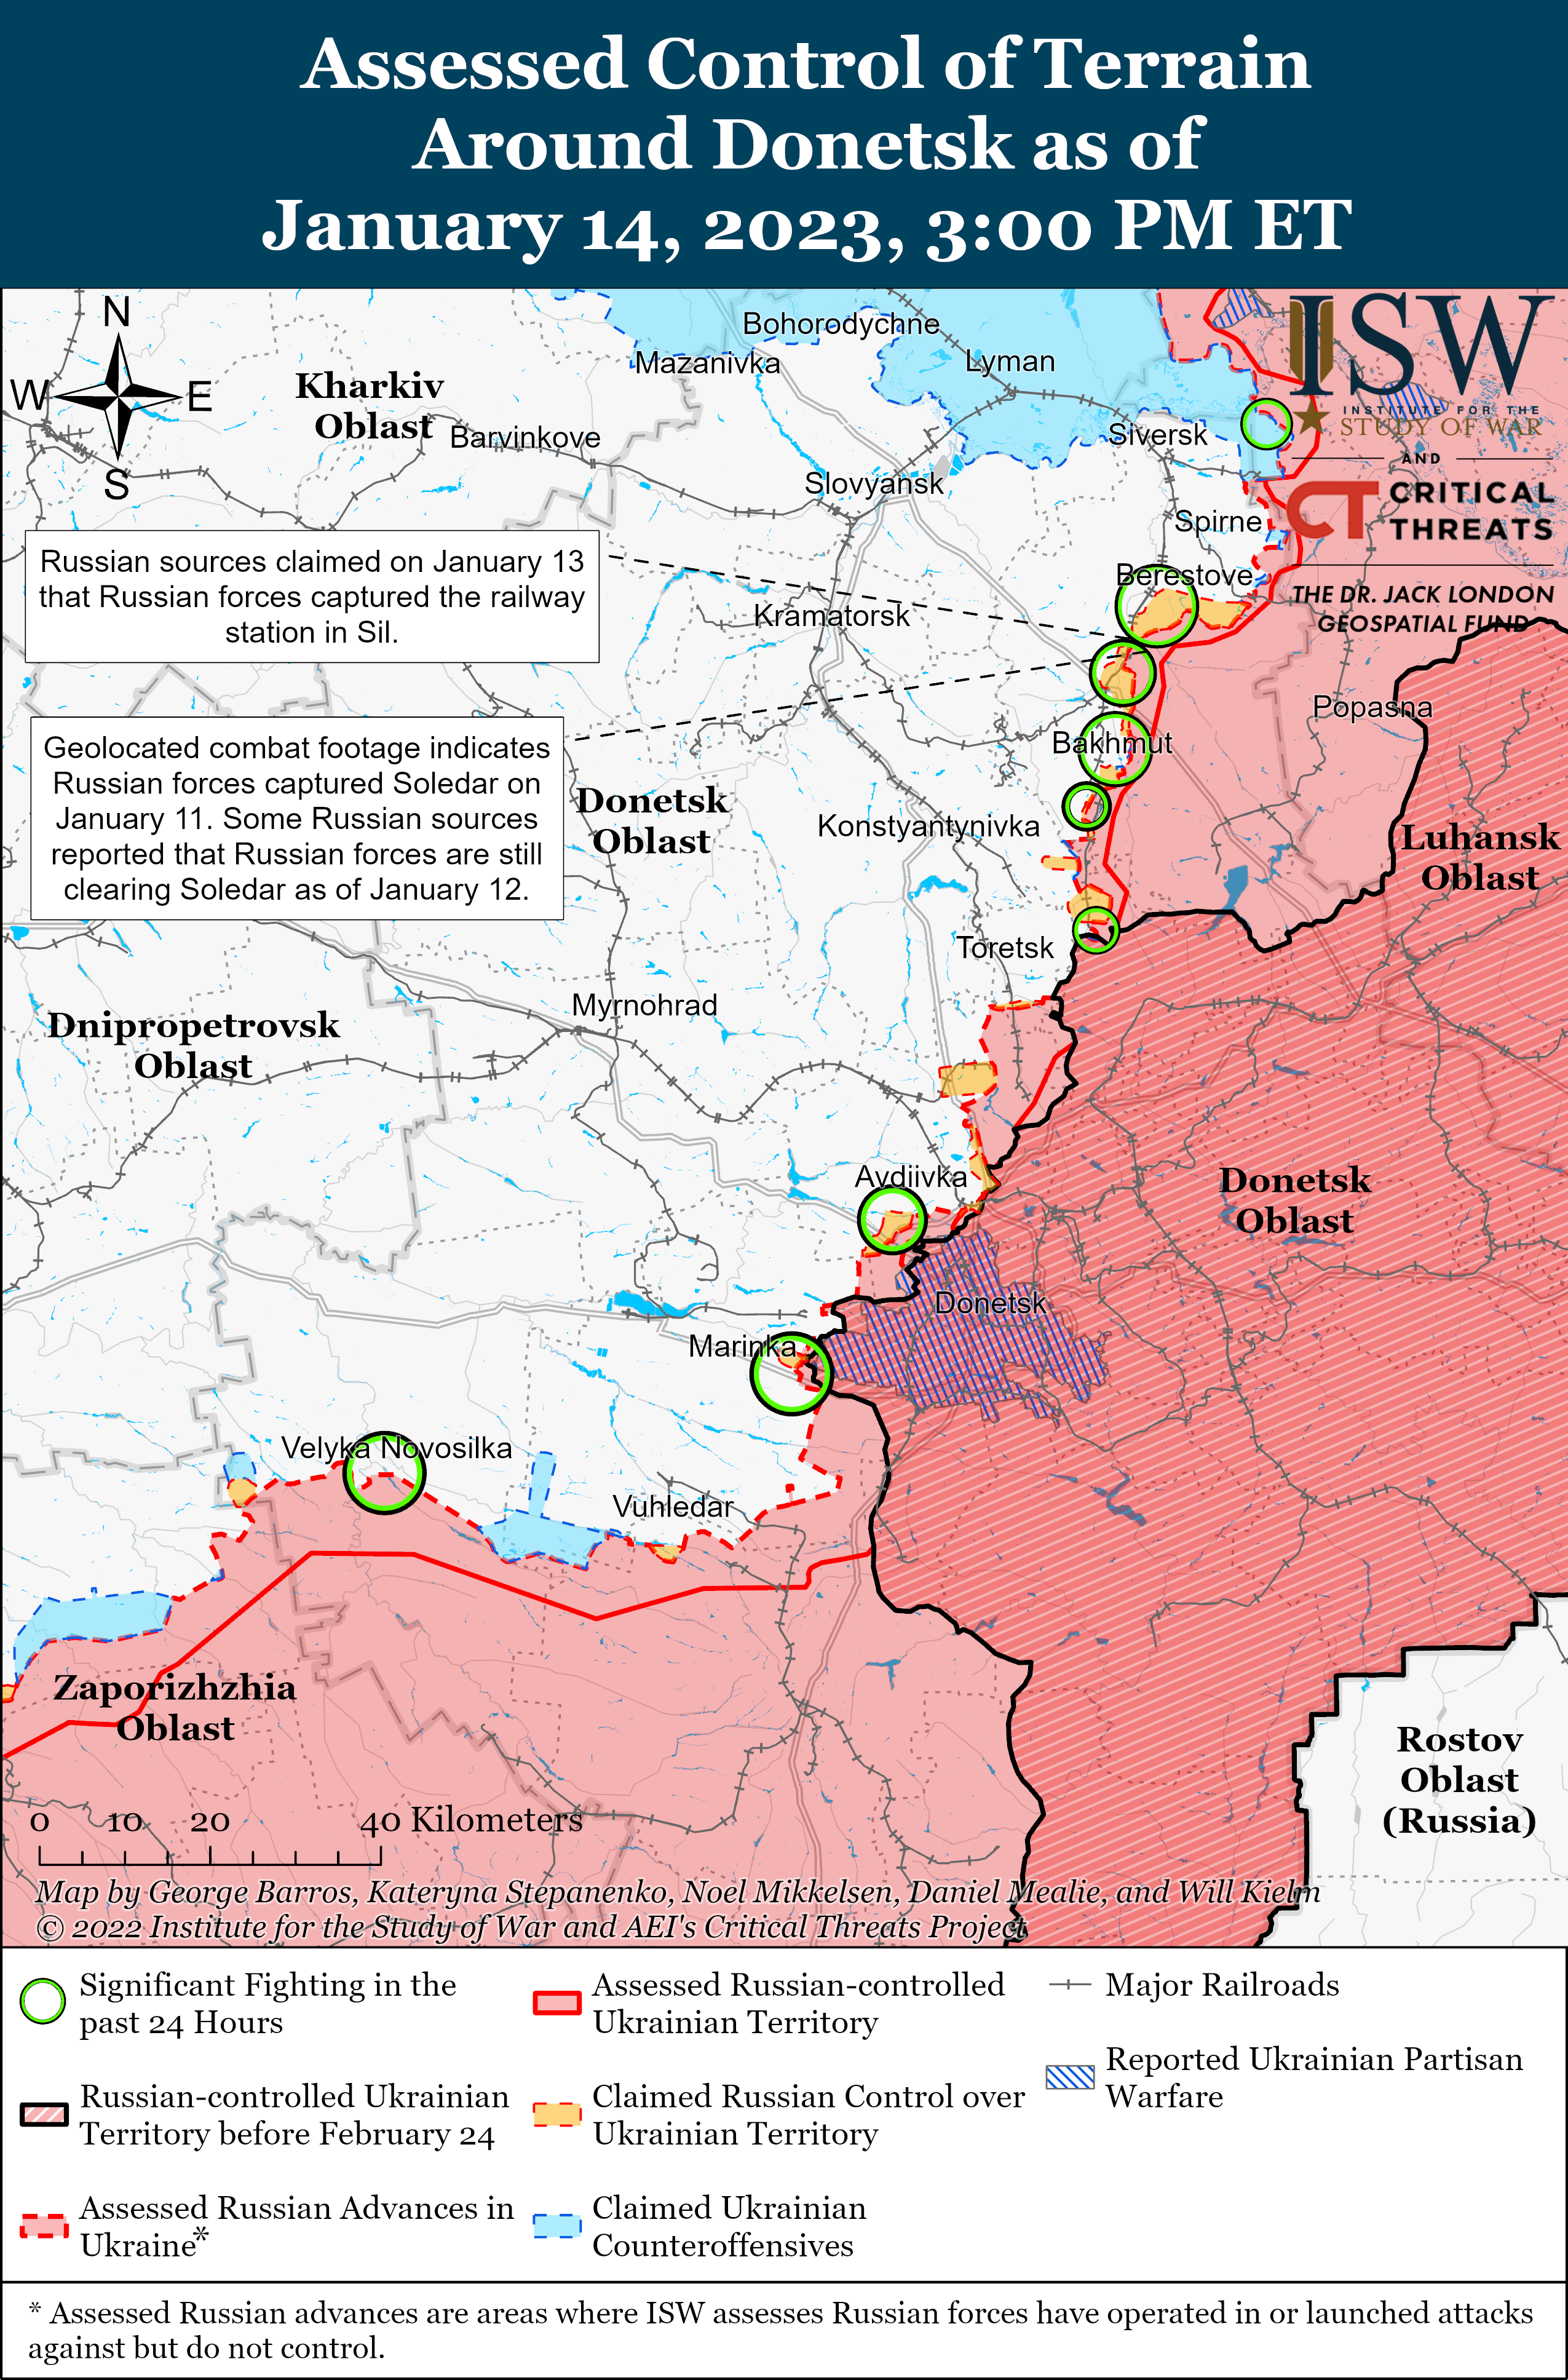 Russian Offensive Campaign Assessment, January 14, 2023 | Critical Threats